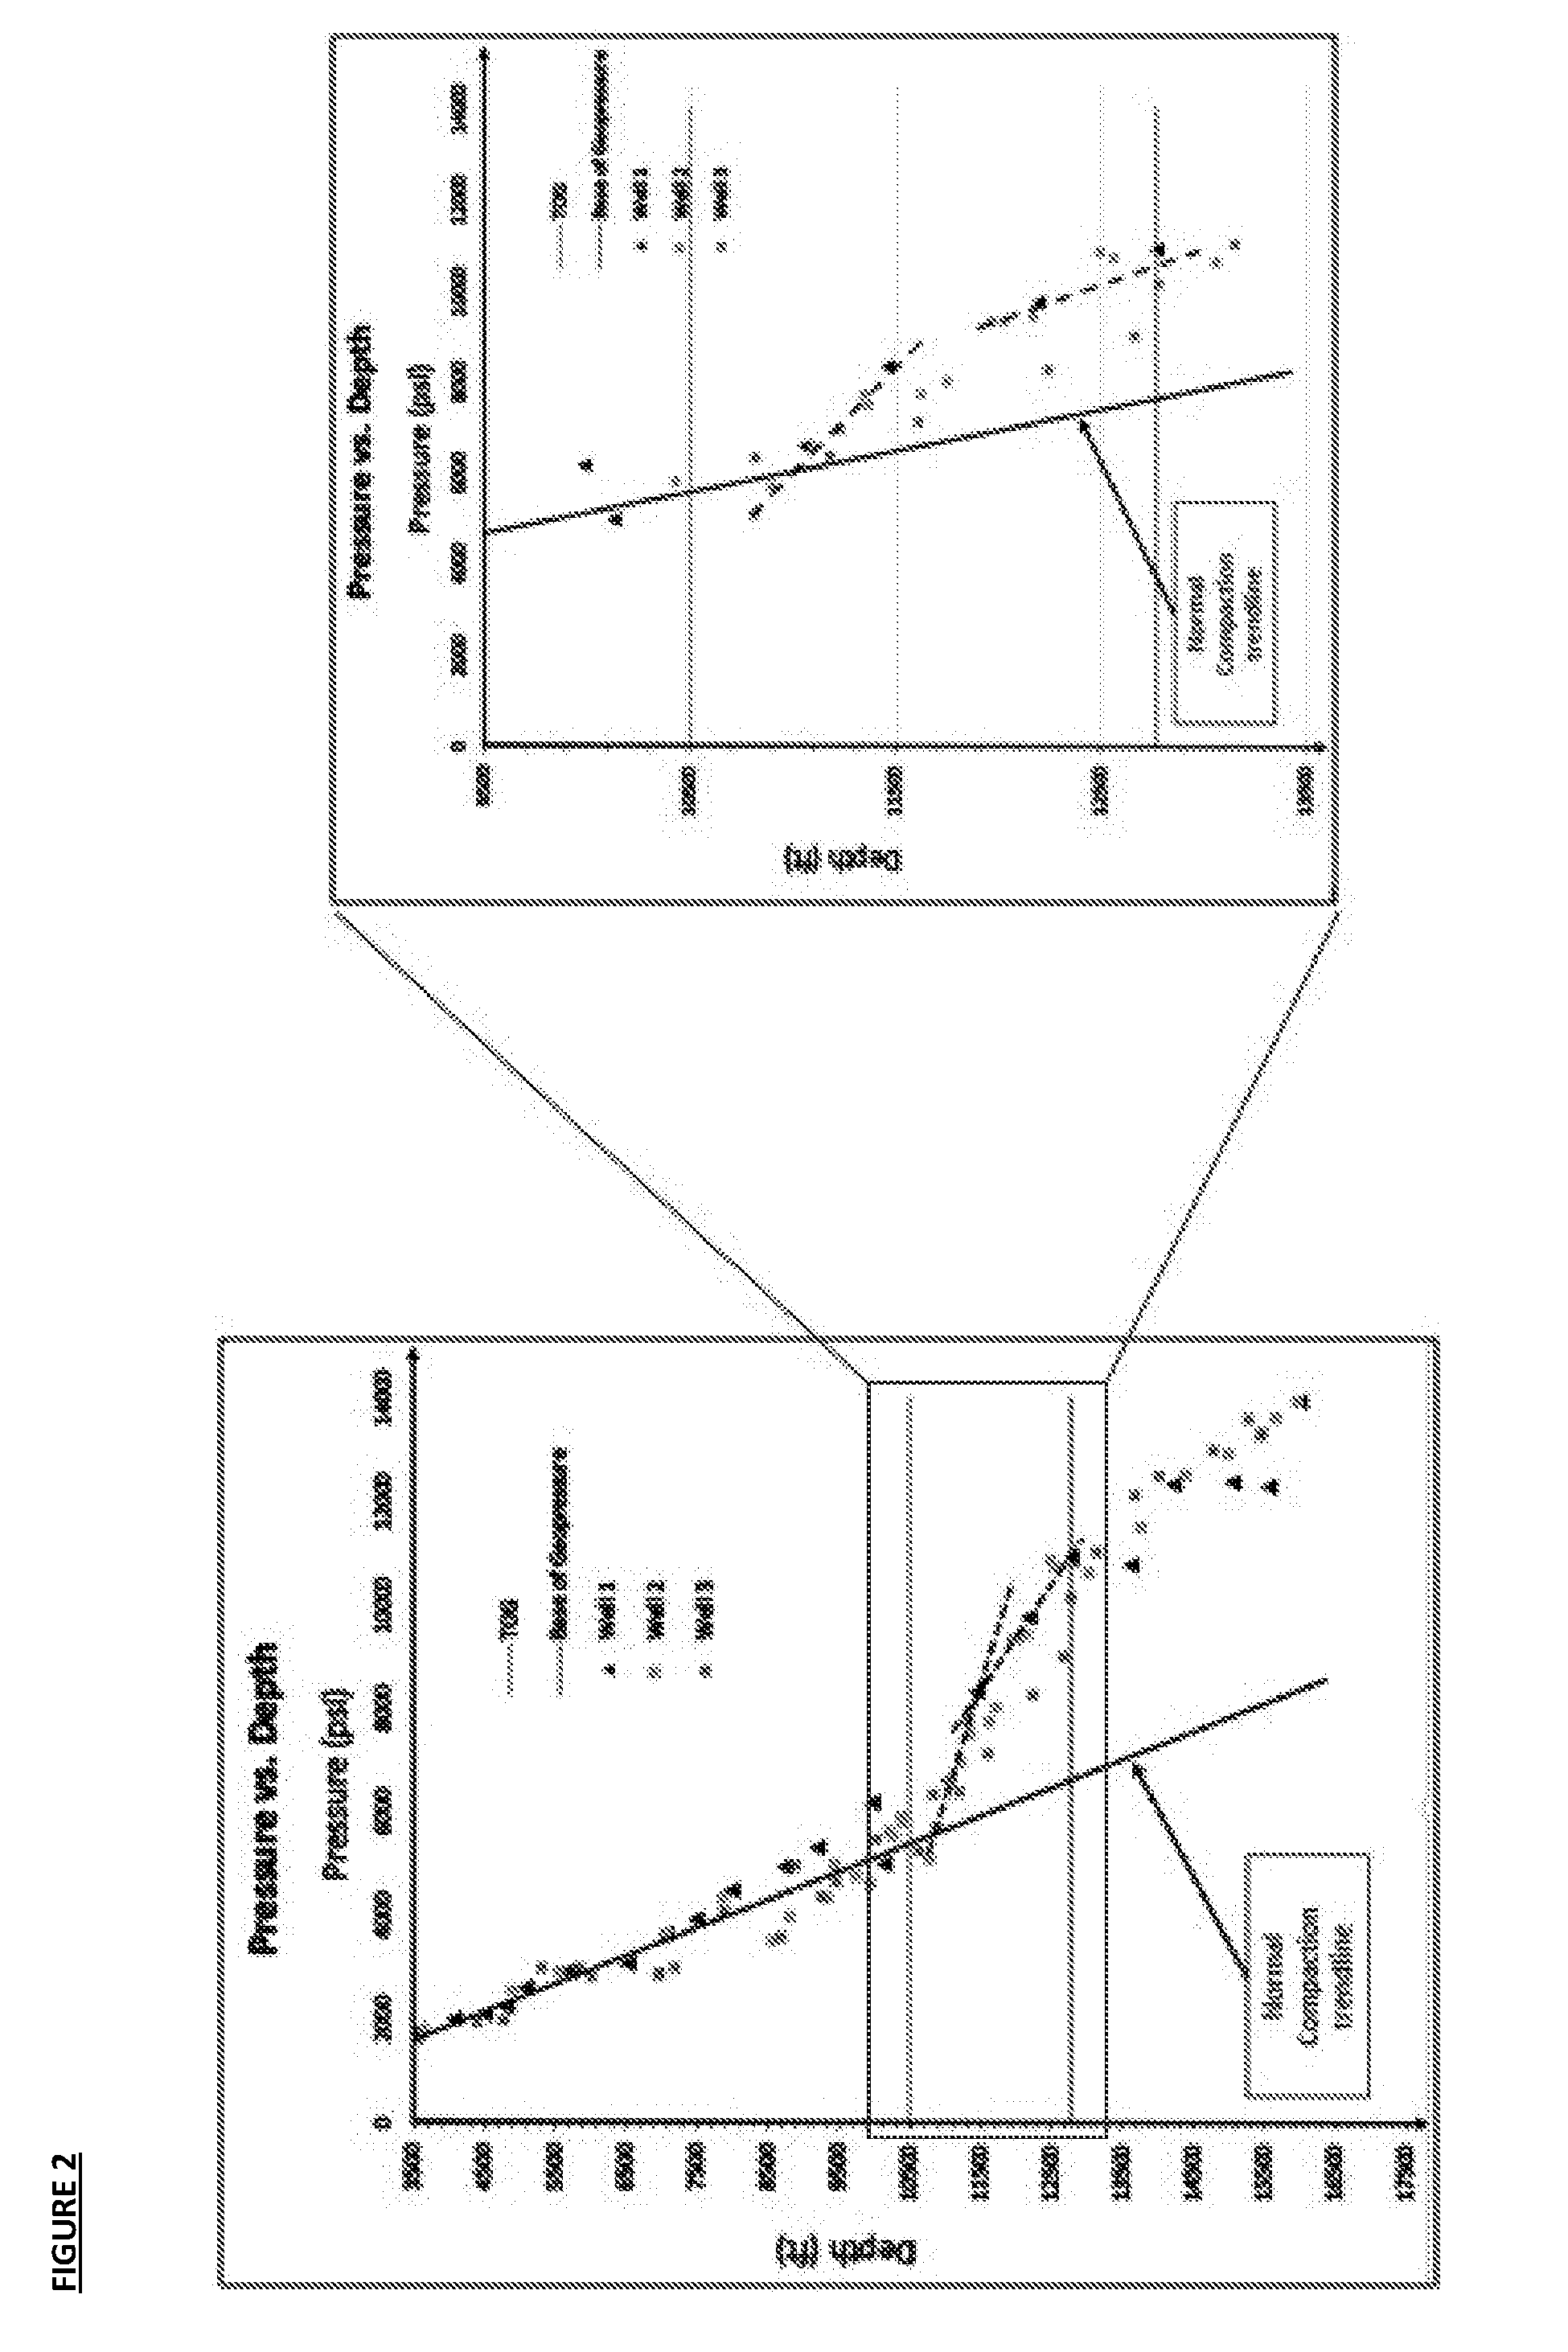 Method for determining pore pressure in oil and gas wells using basin thermal characteristics